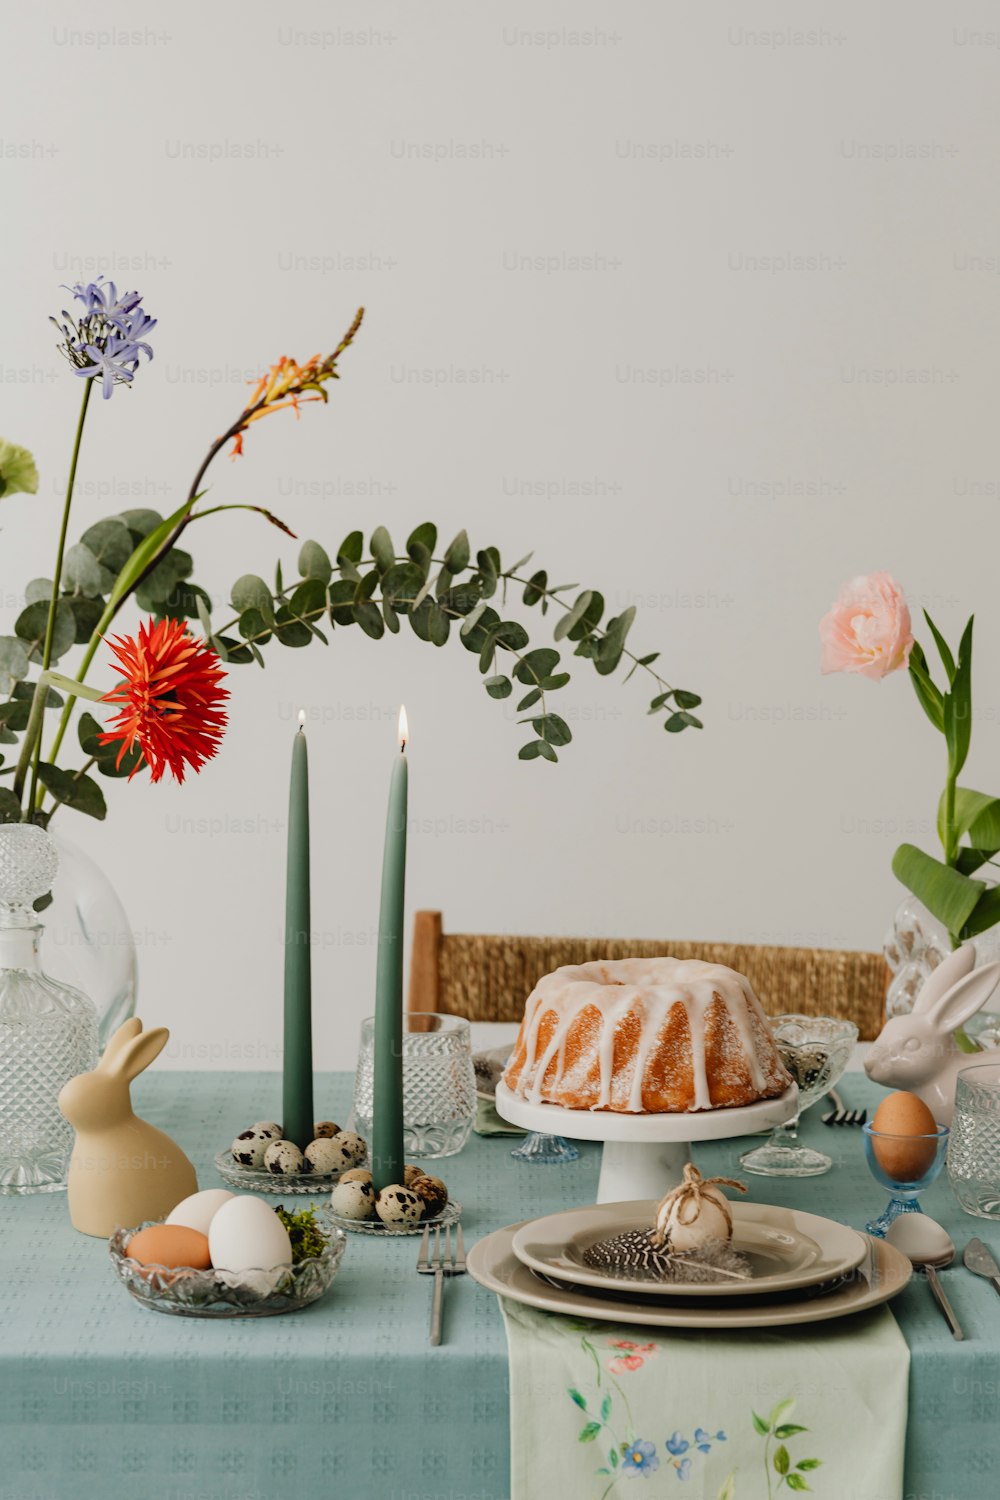 a table topped with a cake next to a vase filled with flowers